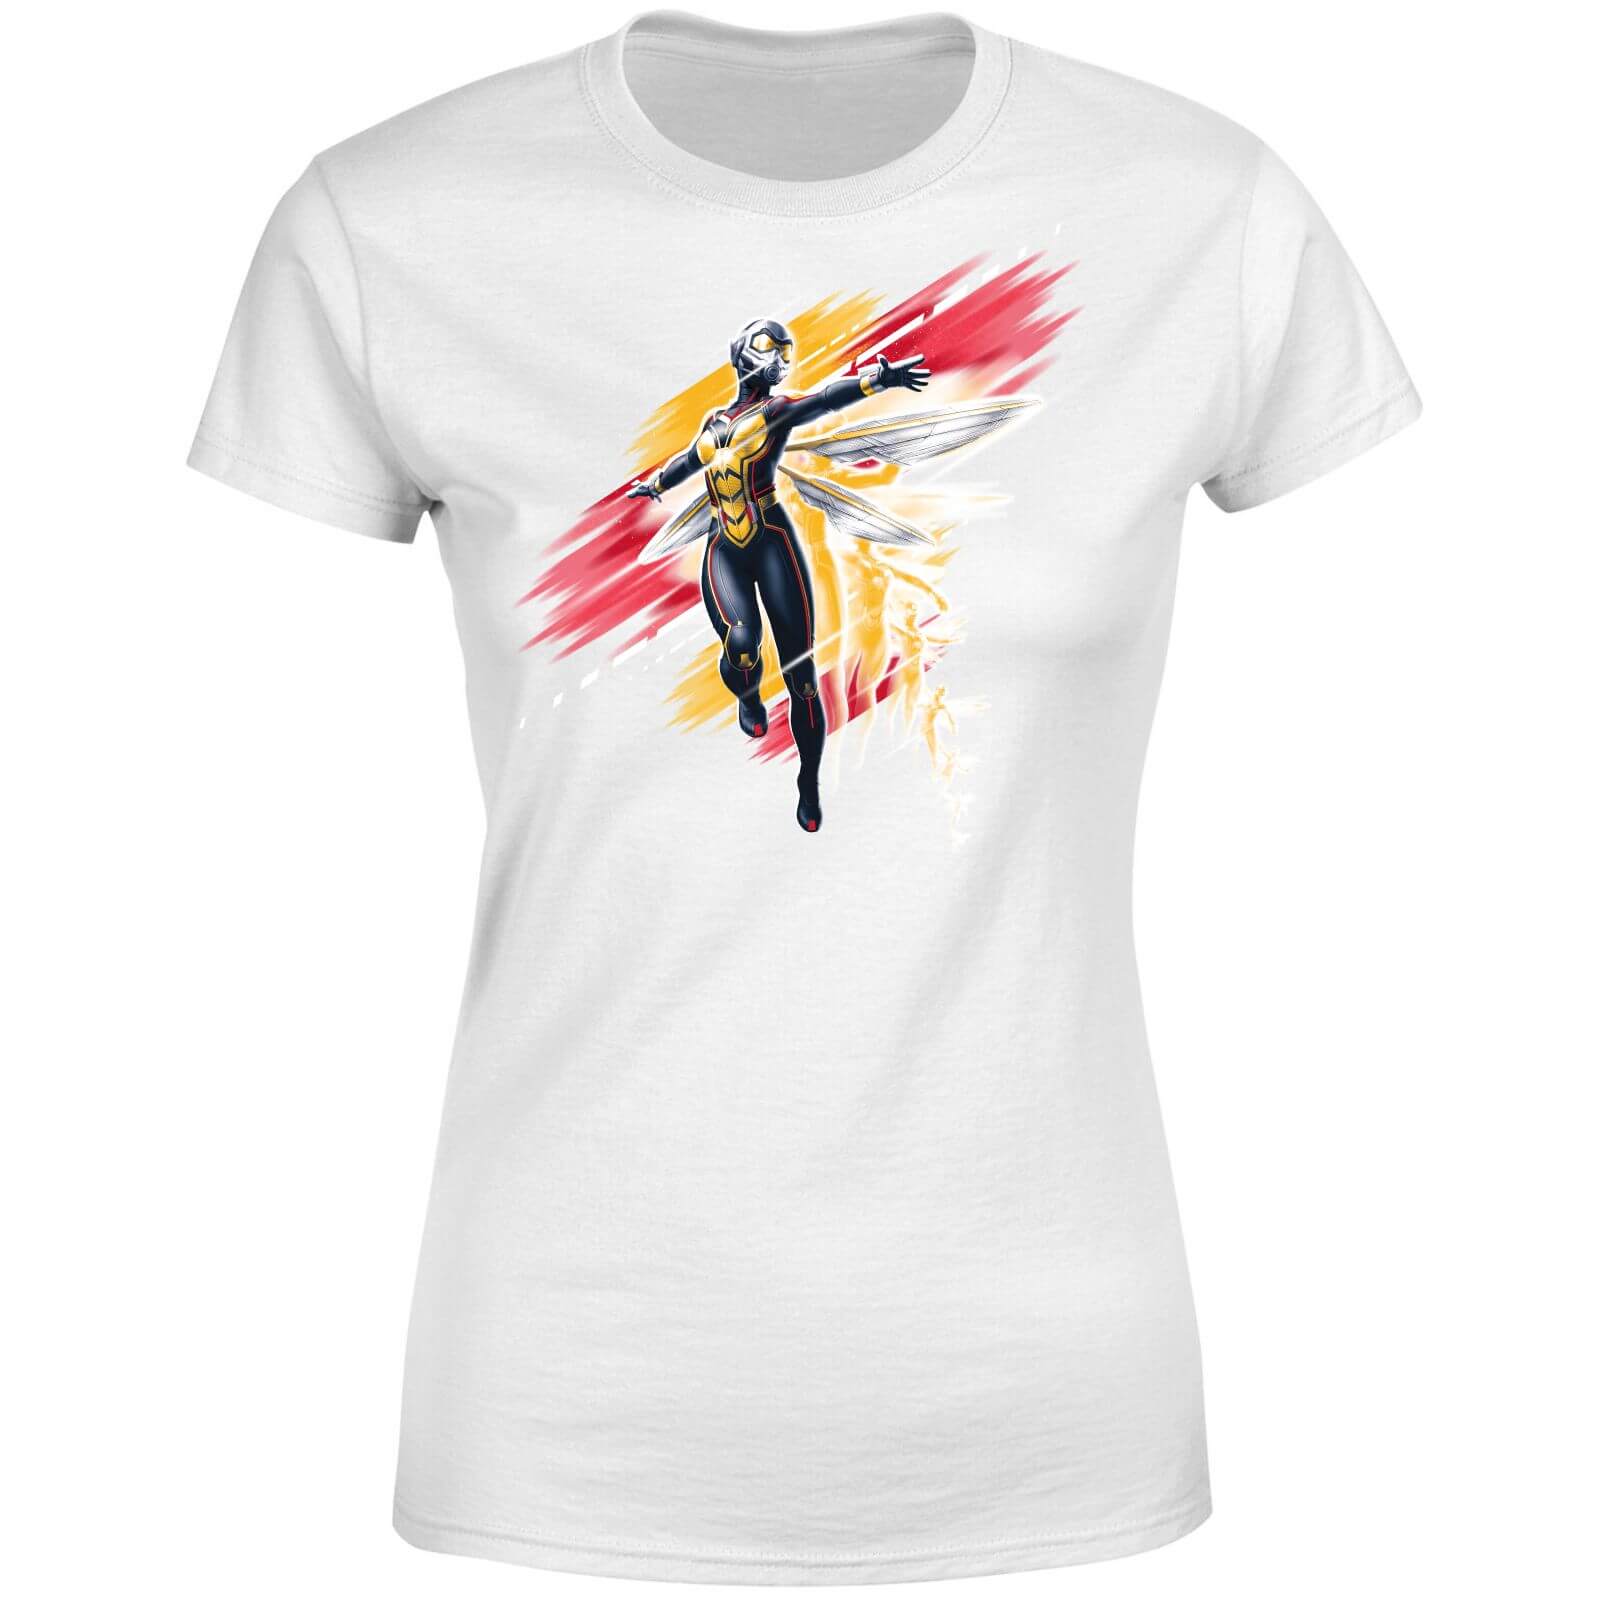 Ant-Man And The Wasp Brushed Damen T-Shirt - Weiß - S - Weiß